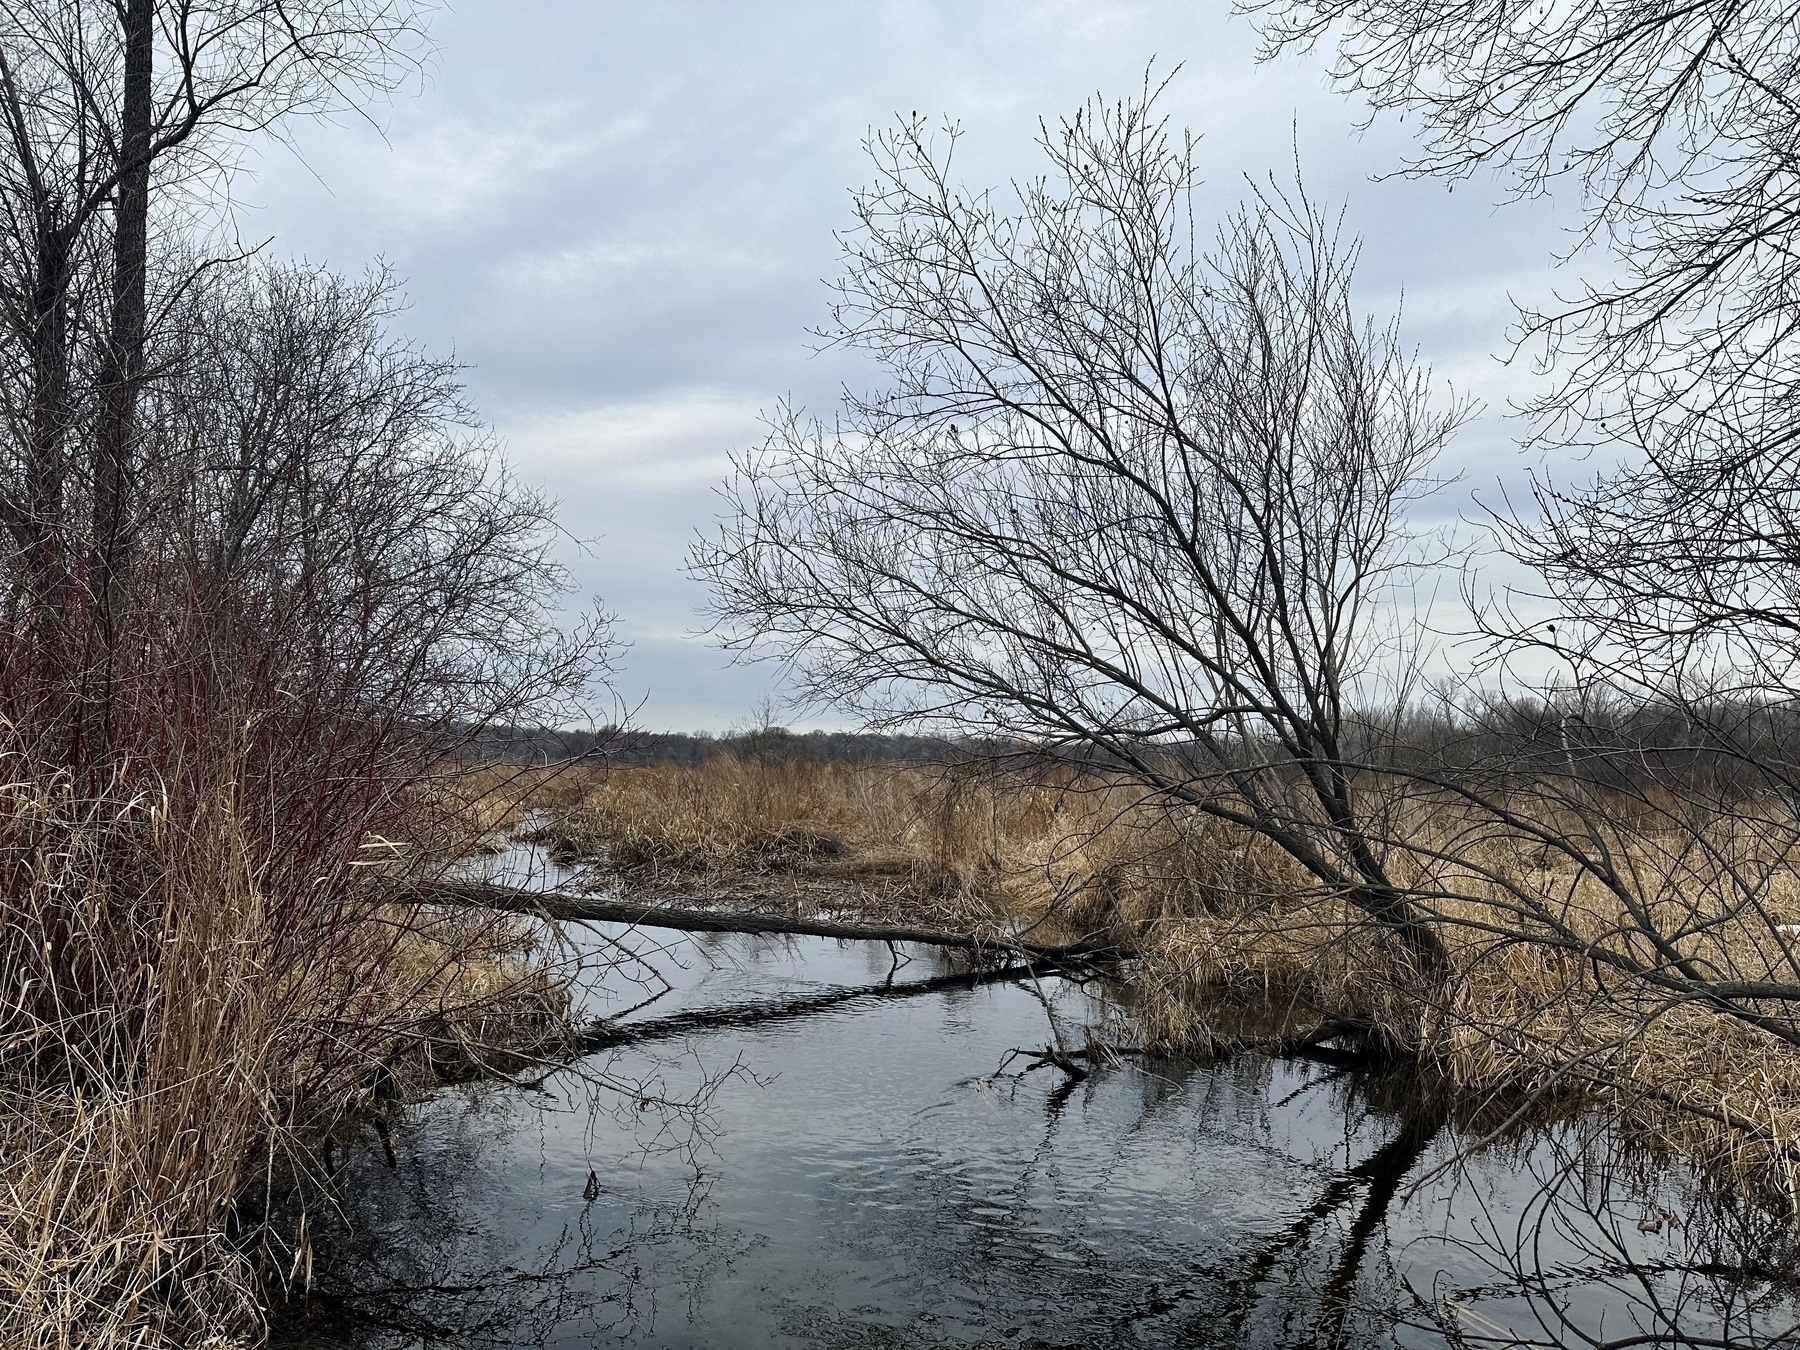 A narrow stream meanders through a dormant, grassy wetland, flanked by leafless trees under an overcast sky.